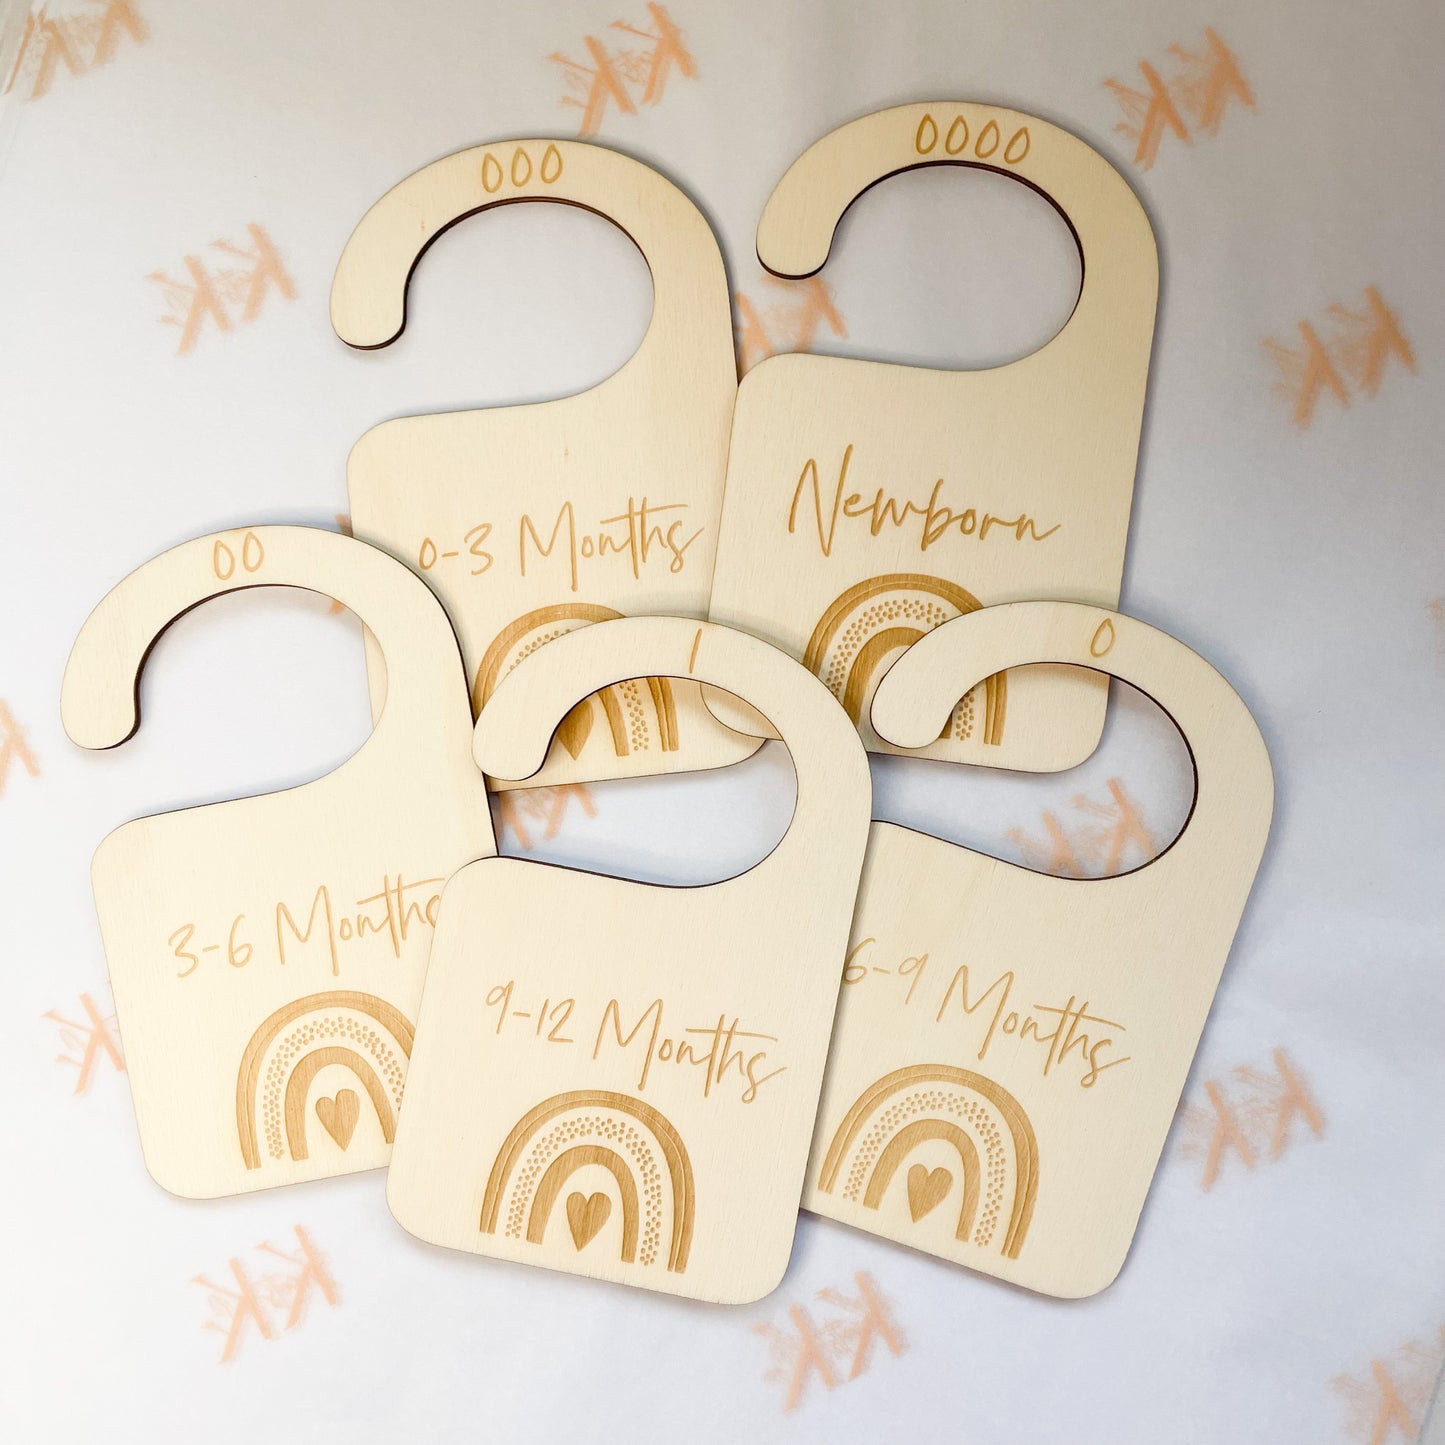 Baby’s Clothing Hanger Dividers